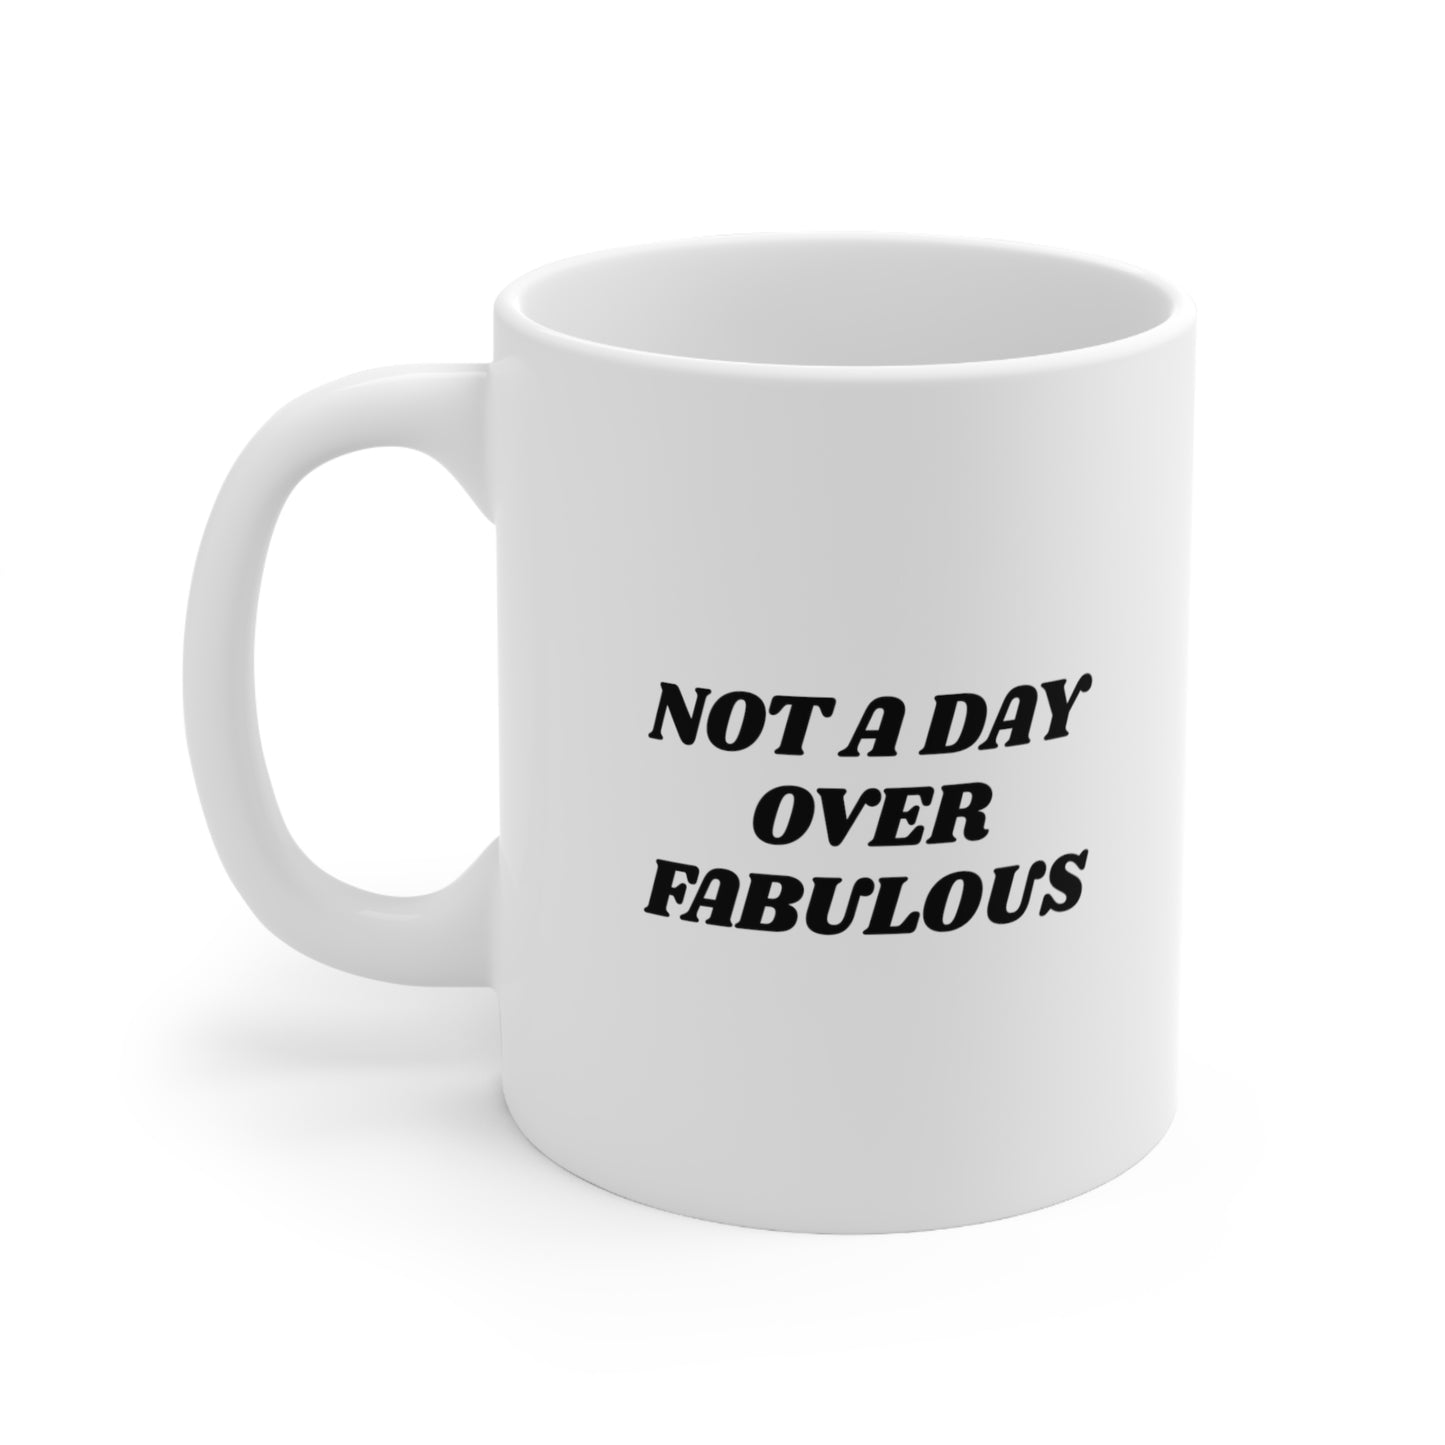 Not a Day Over Fabulous Coffee Mug 